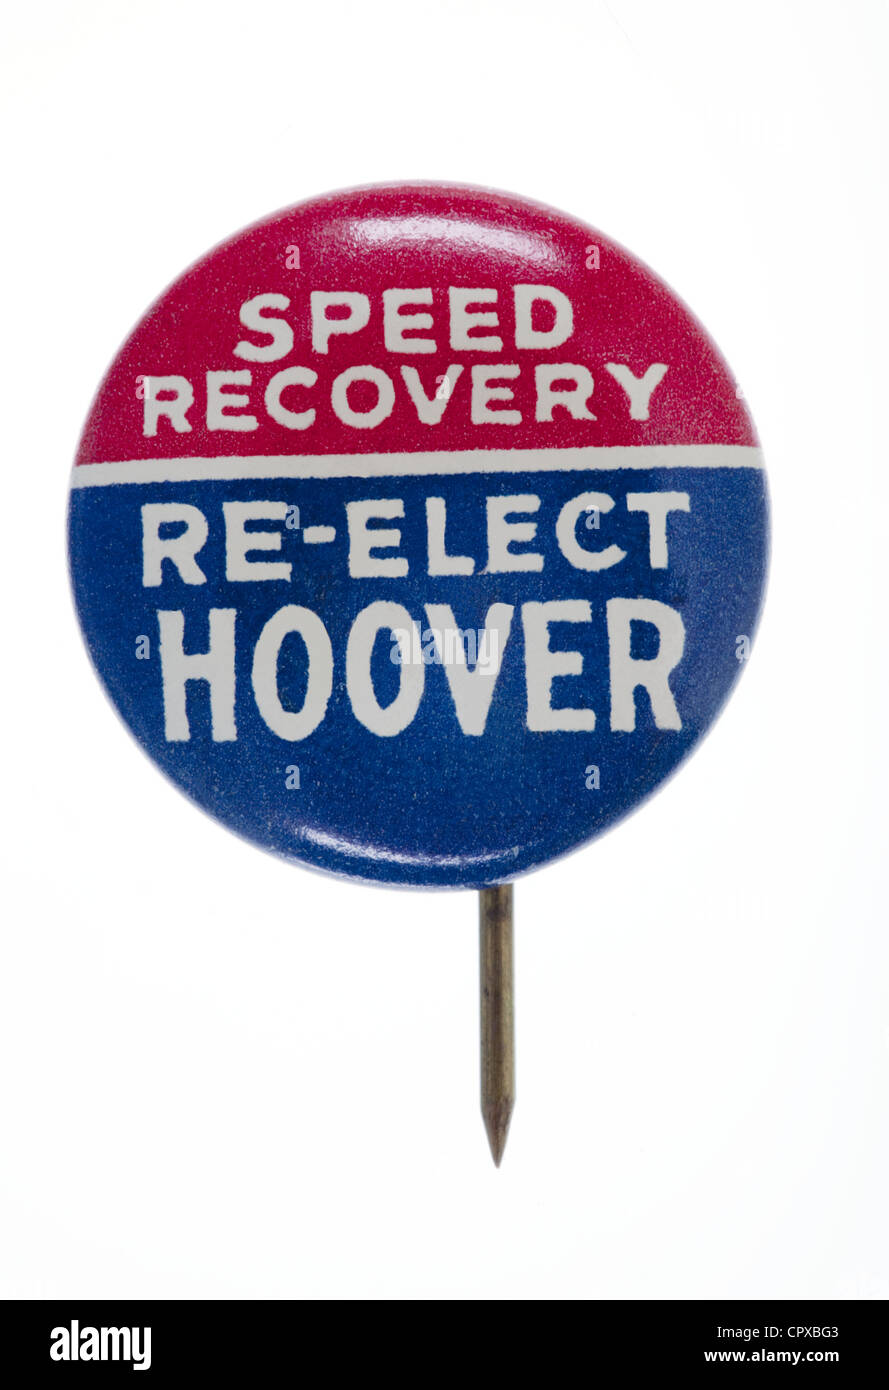 1932 presidential election button pin for Herbert Hoover Stock Photo